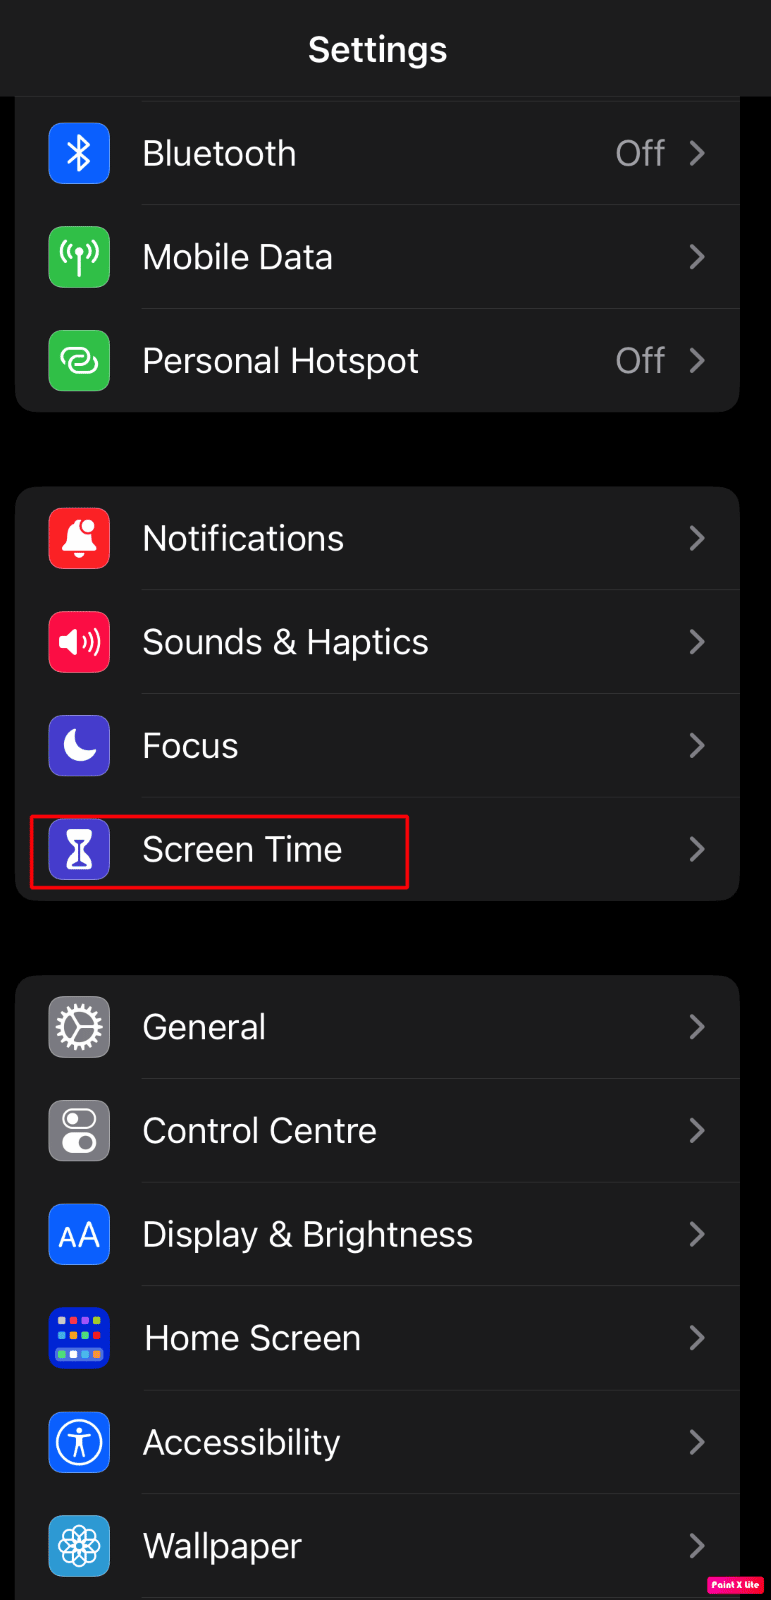 tap on screen time option